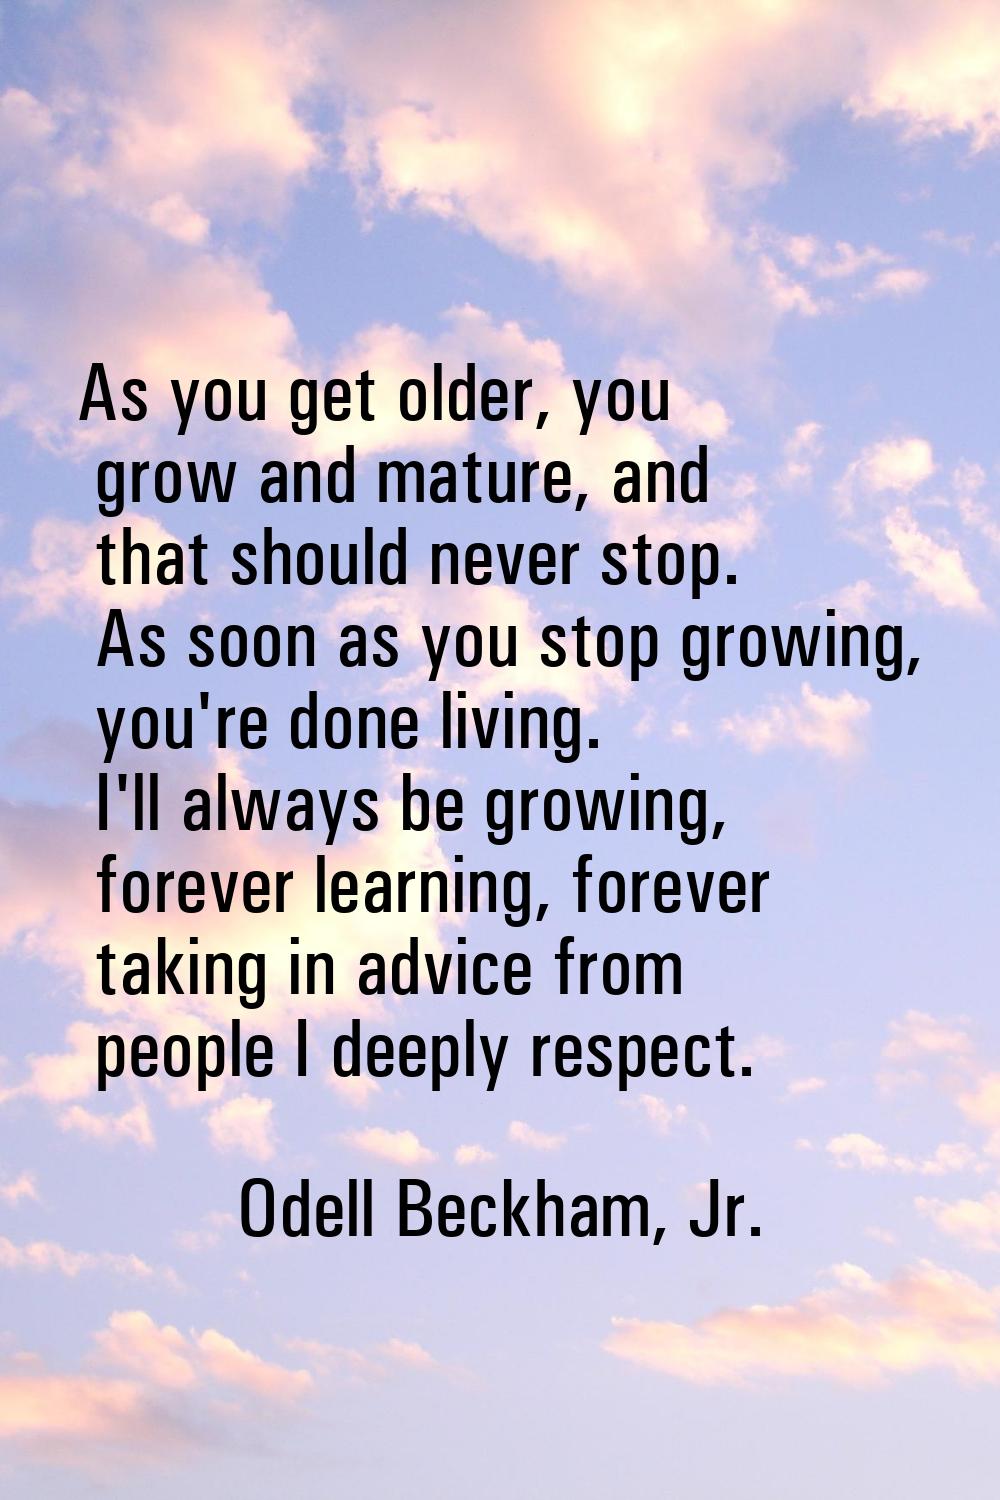 As you get older, you grow and mature, and that should never stop. As soon as you stop growing, you